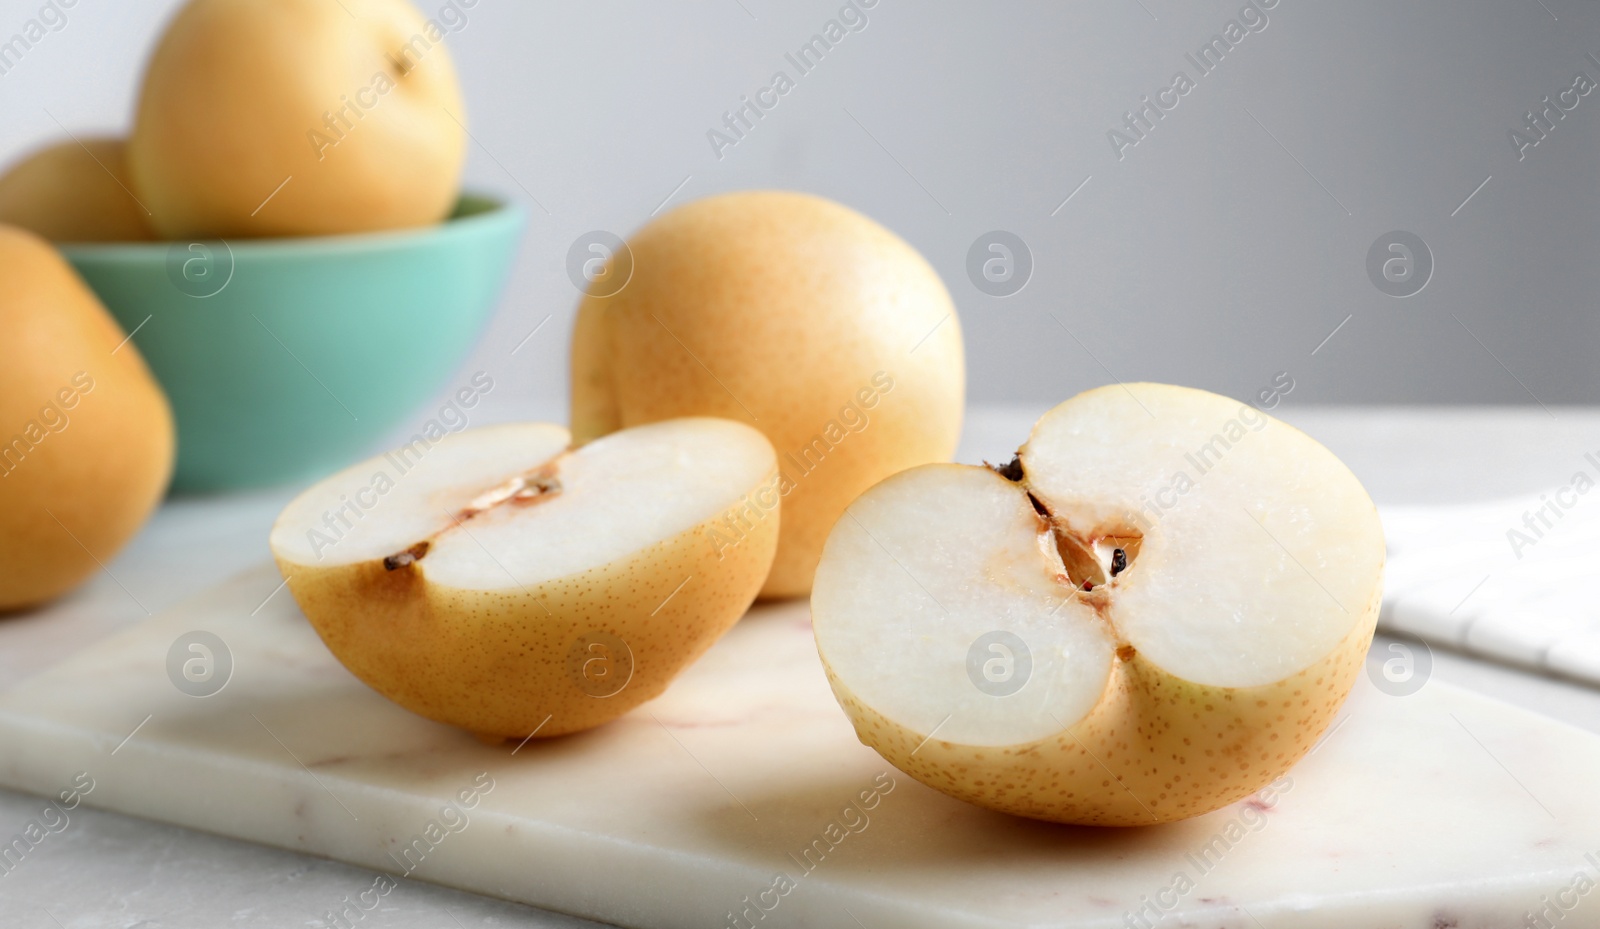 Photo of Cut and whole apple pears on table